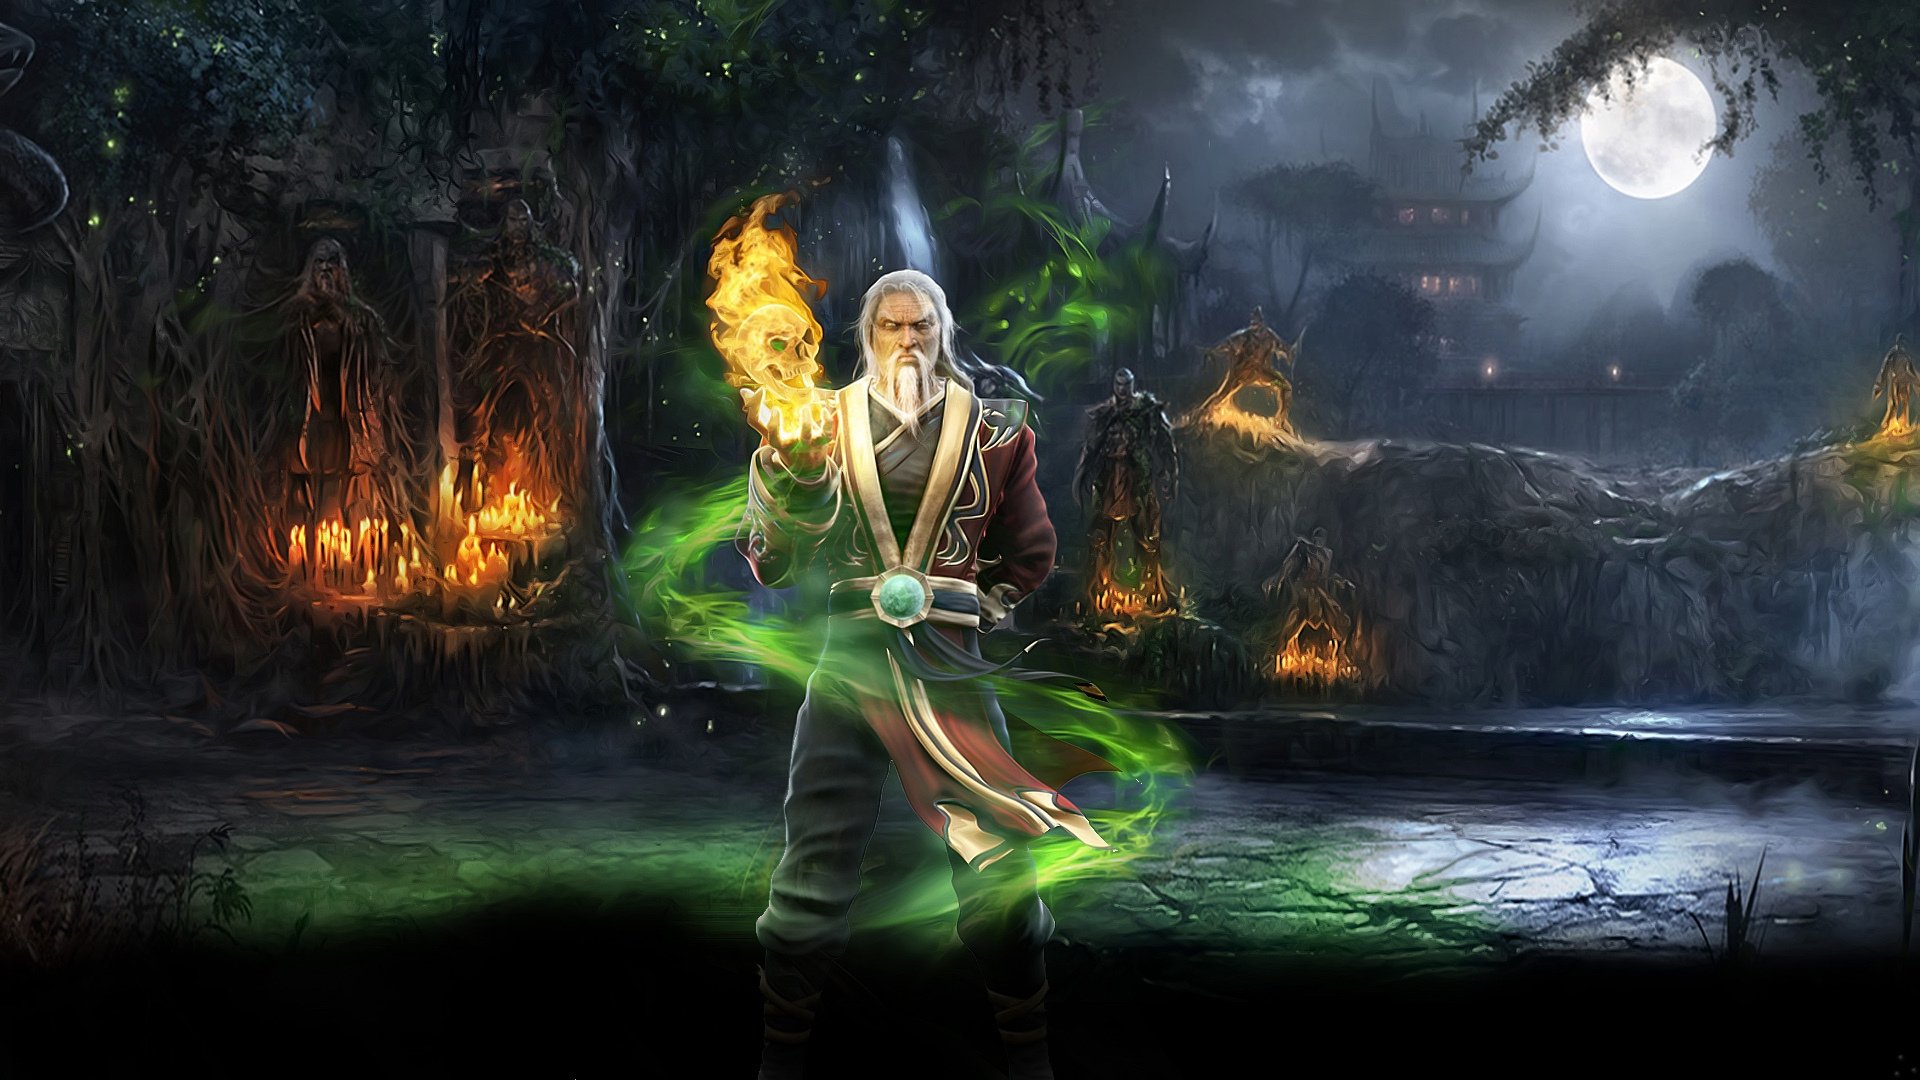 Sorcerer Full HD Wallpaper and Background Image | 1920x1080 | ID:146819